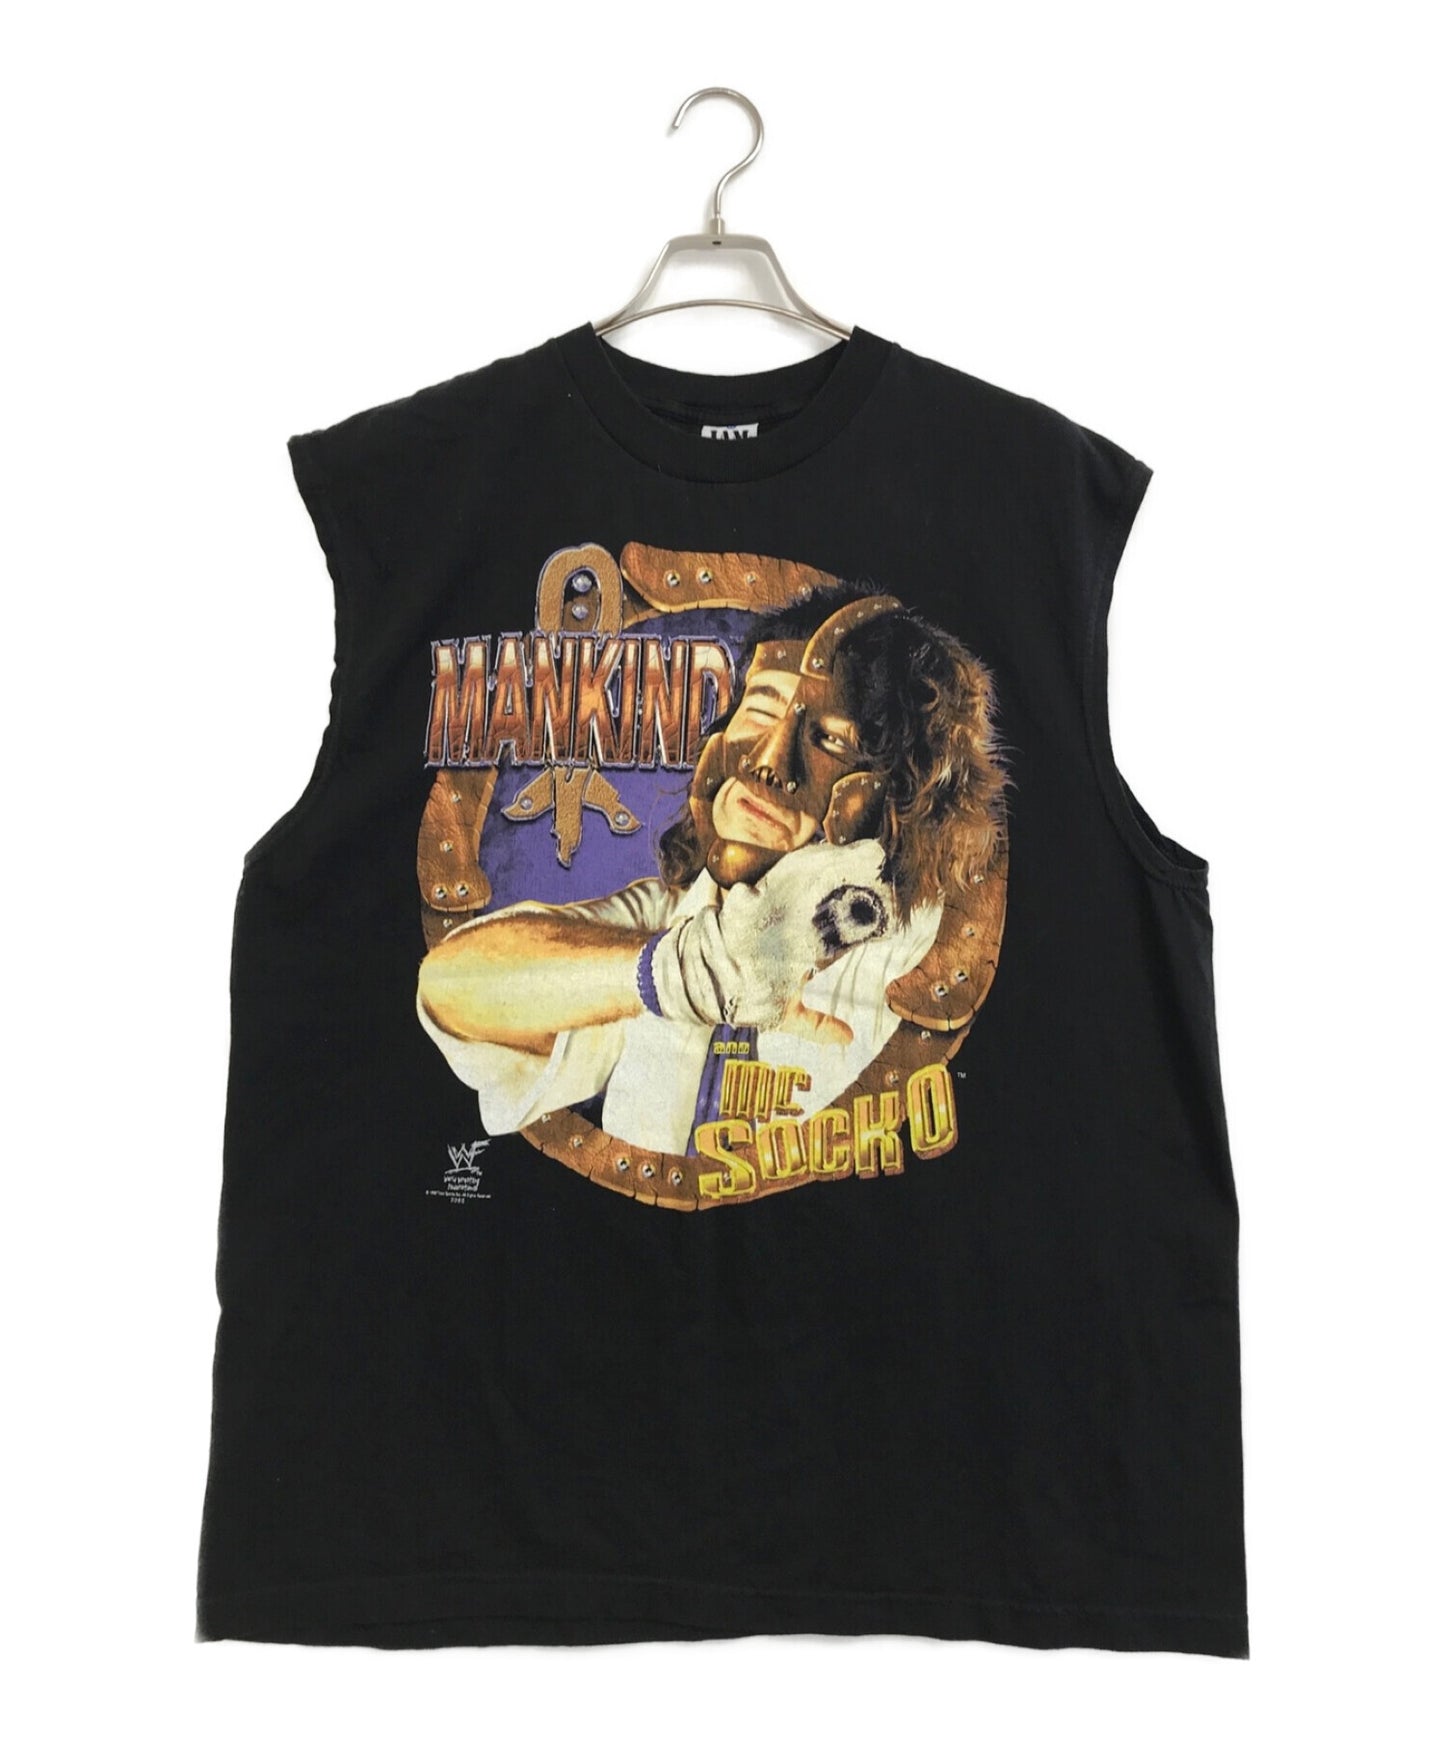 [Pre-owned] Mick Foley [Secondhand Clothing] Wrestling Tee